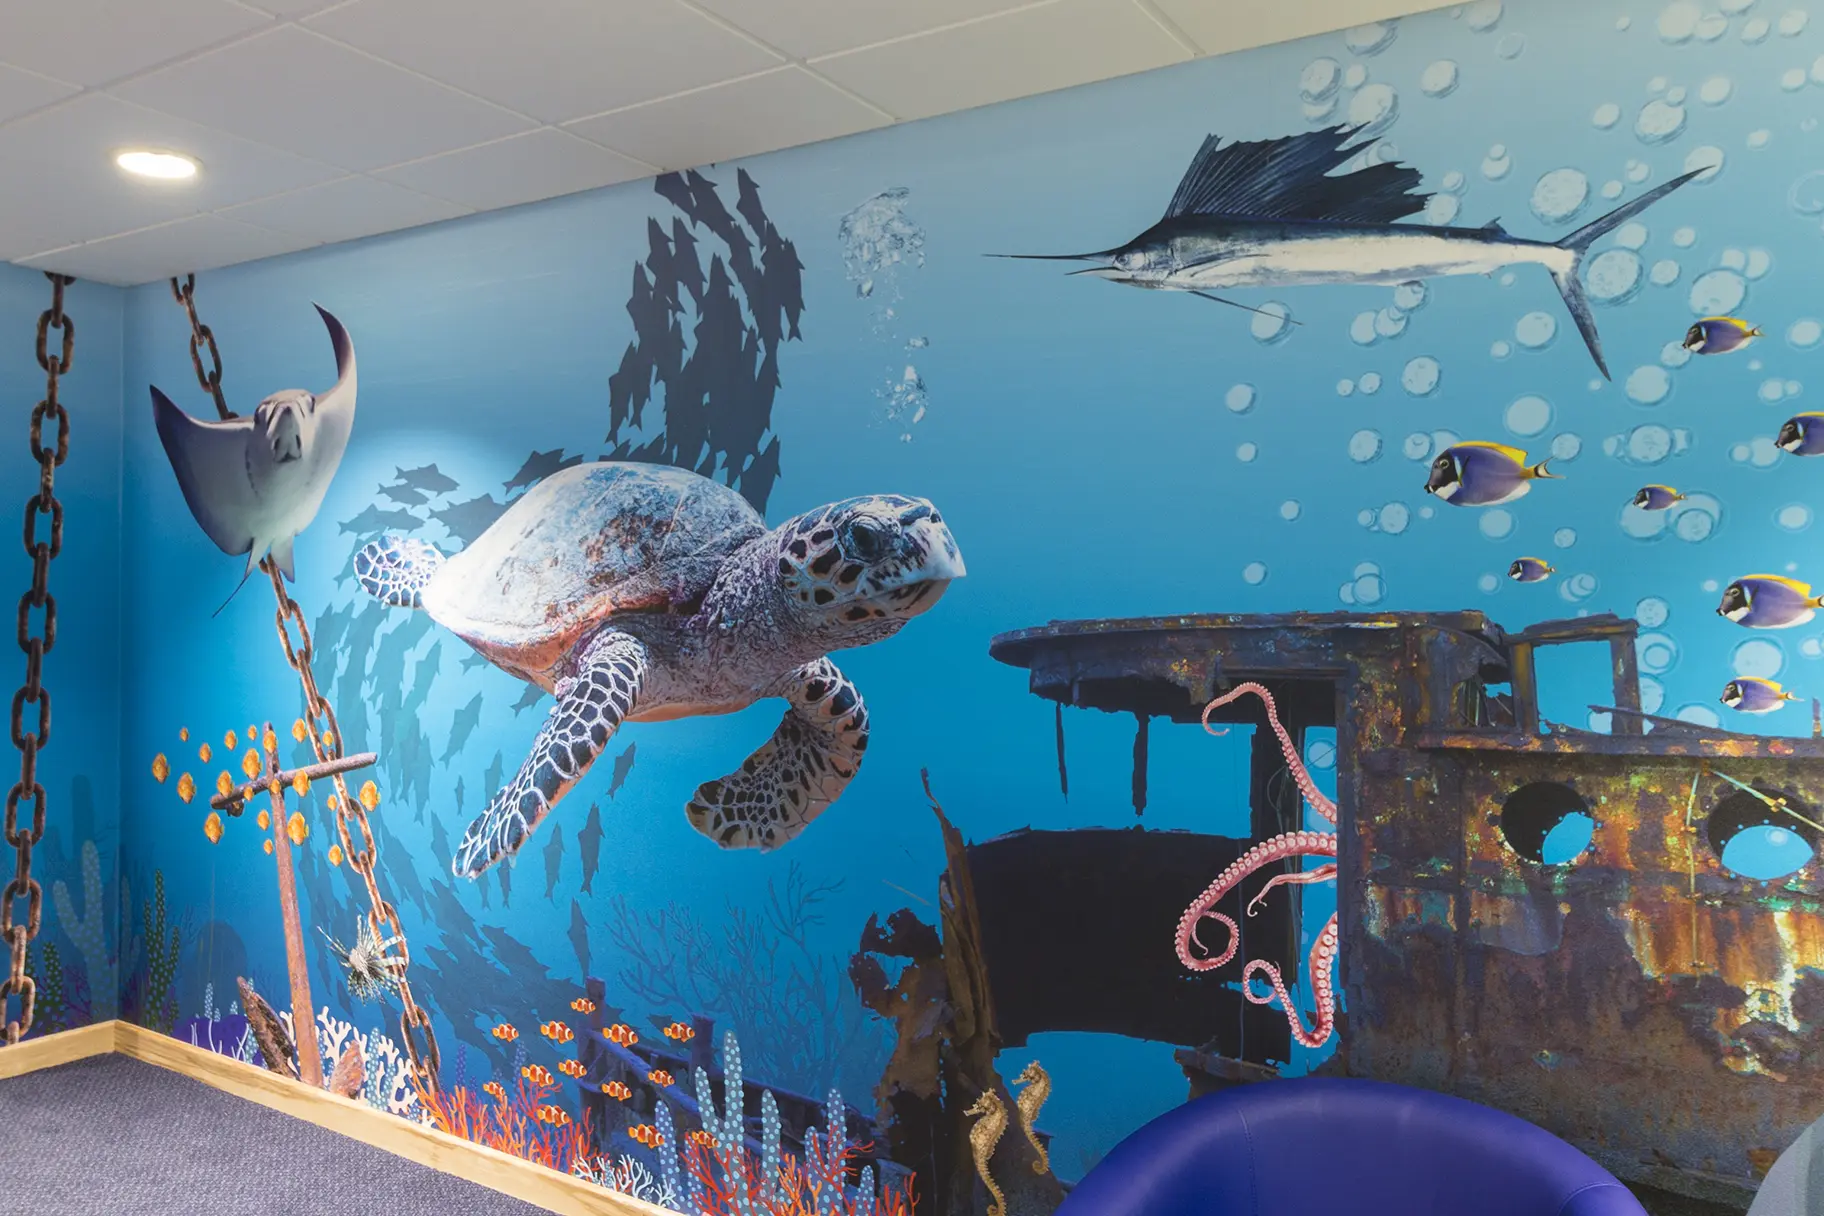 Lee Chapel underwater and jungle immersive themed wall art